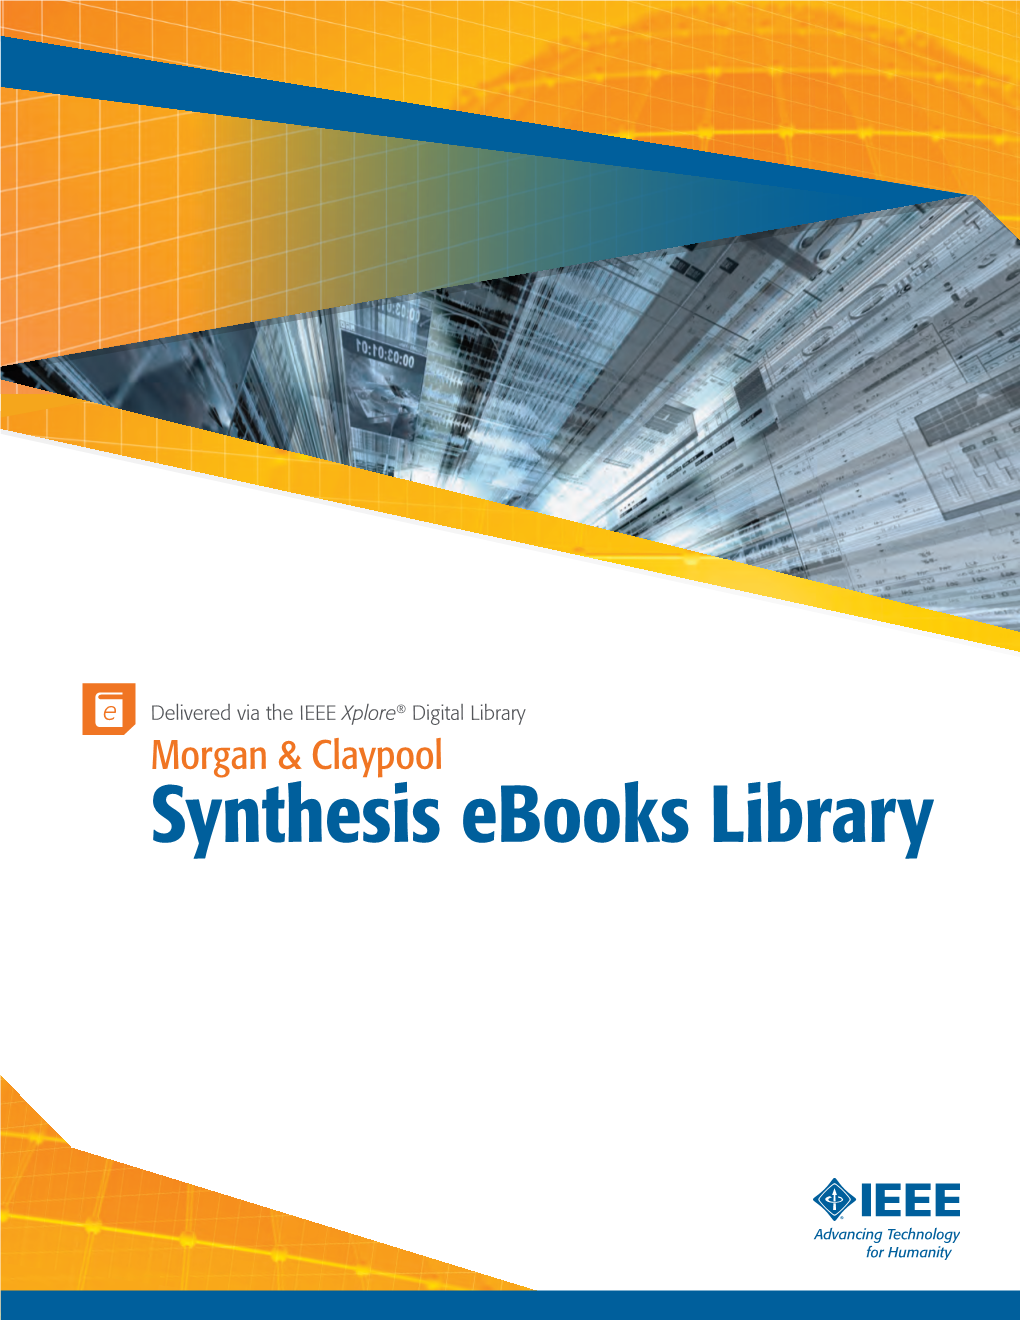 Synthesis Ebooks Library